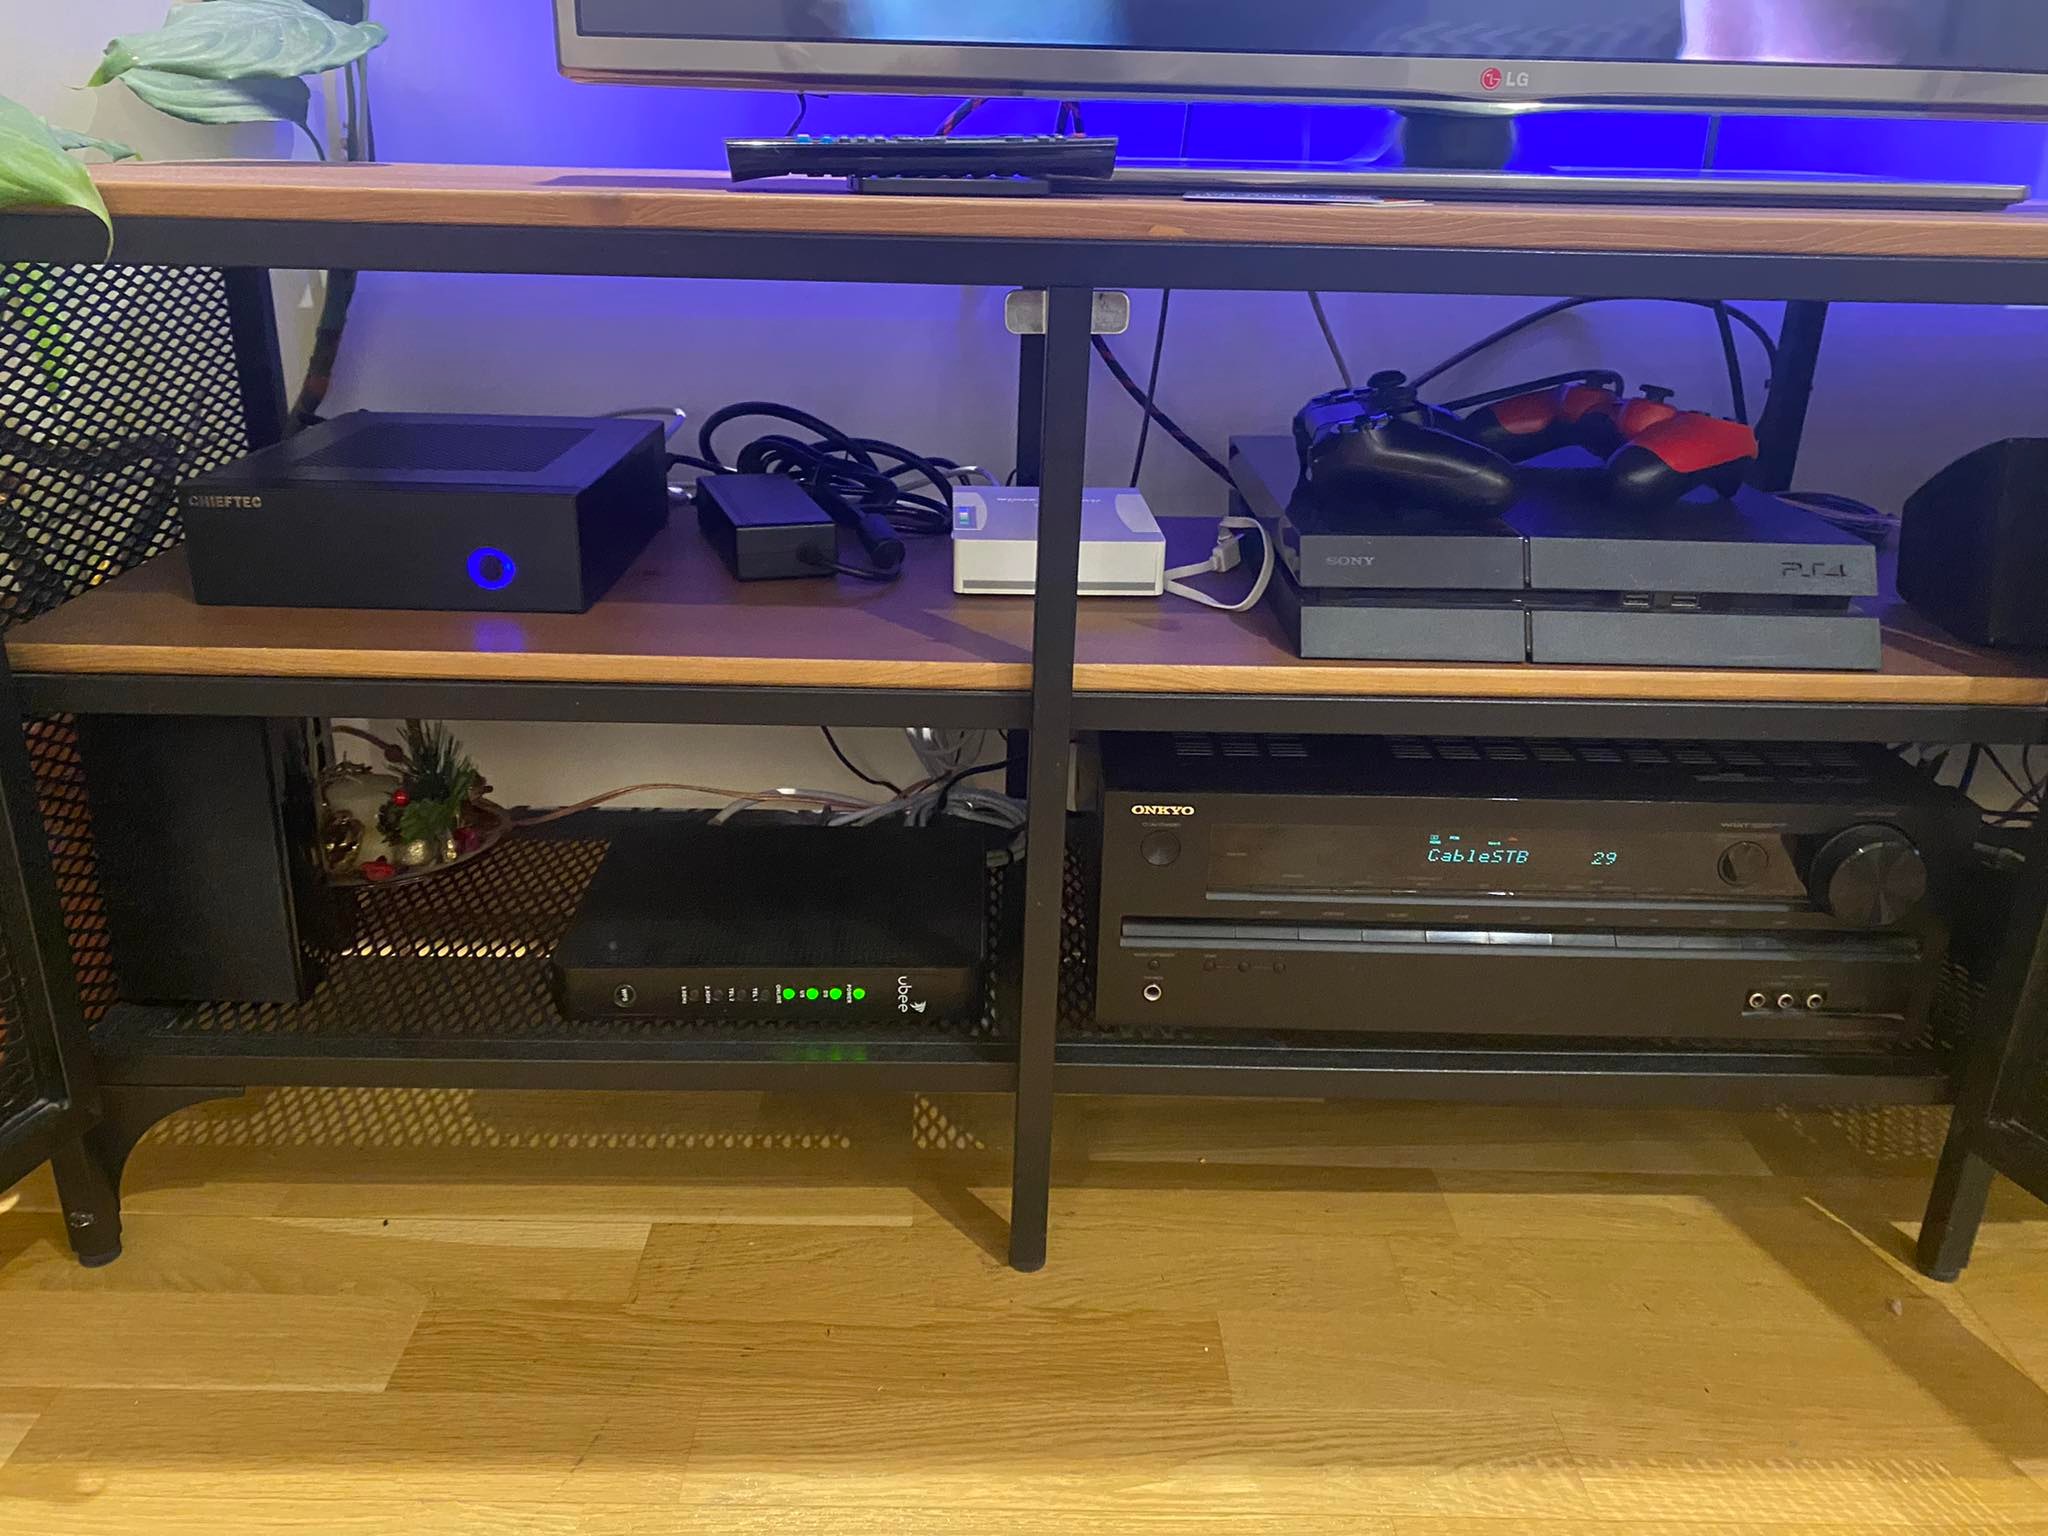 Assembled HTPC displayed with other devices for scale